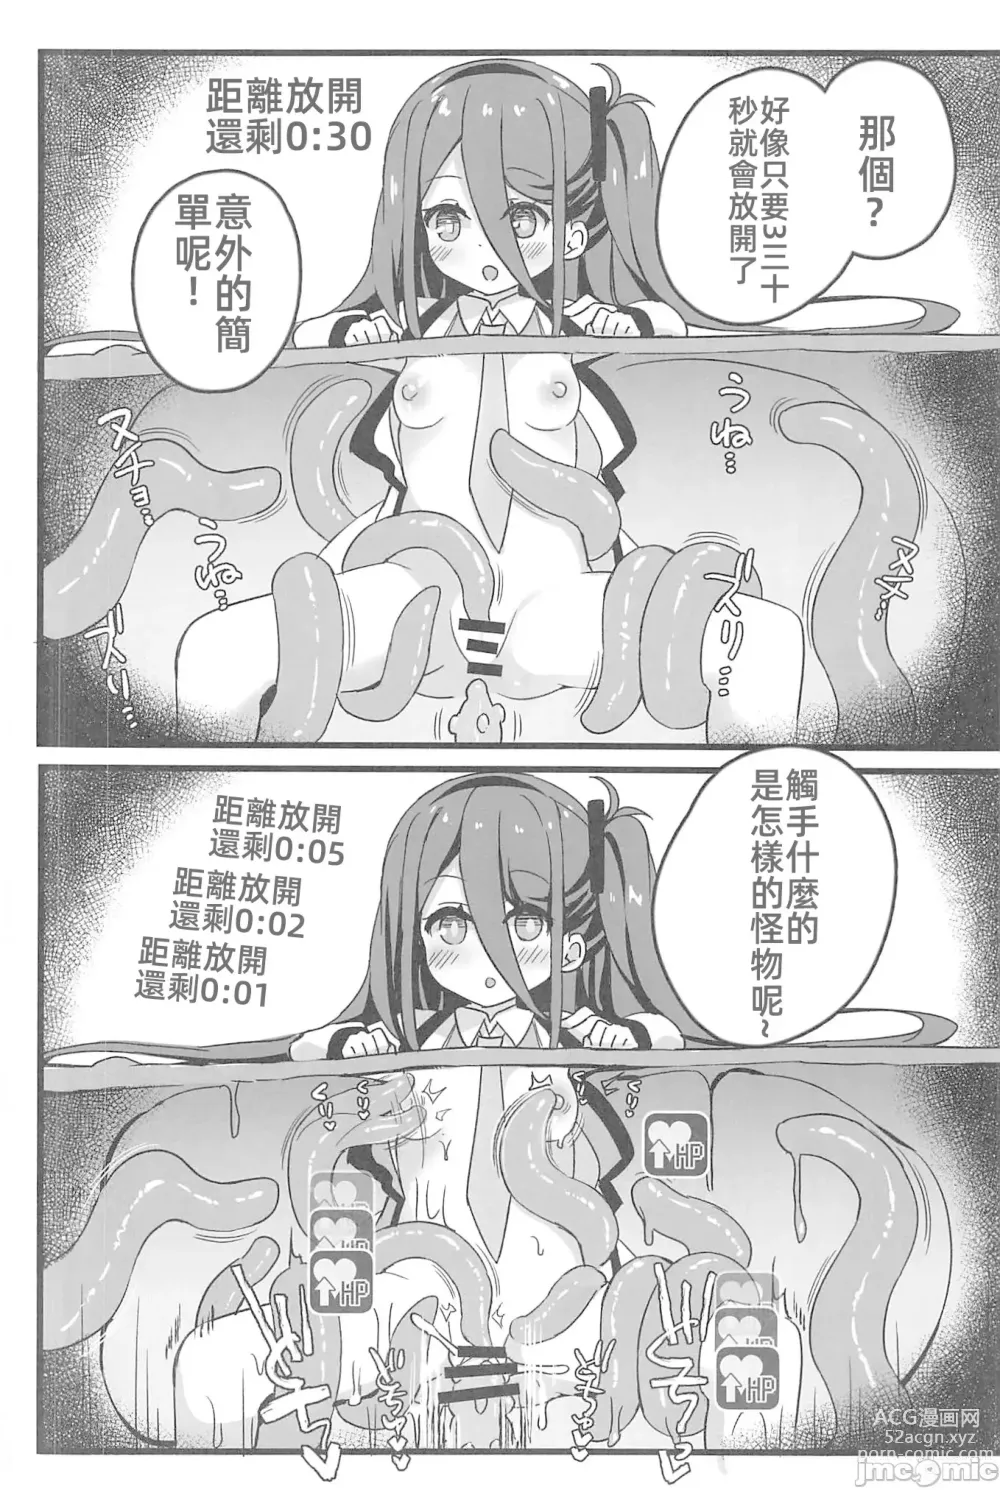 Page 11 of doujinshi 絕對要攻克給你看!!